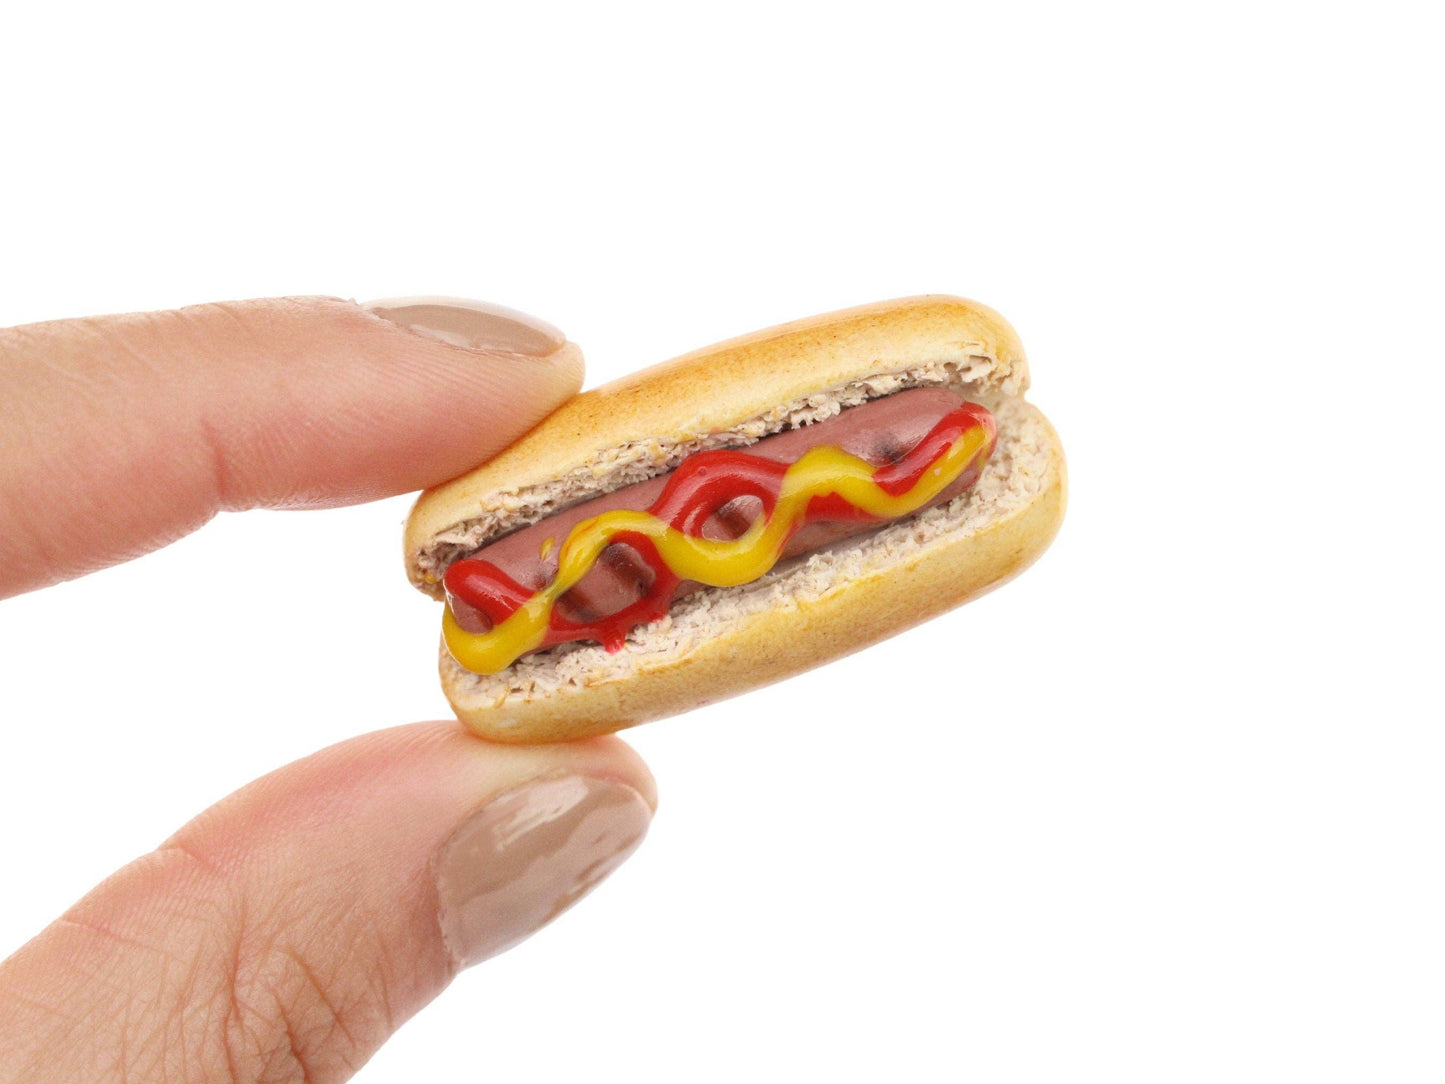 Photo of single mini hot dog magnet pinched between fingertips. Hot dog depicted with grill marks and a squiggle each of ketchup and mustard. White background.